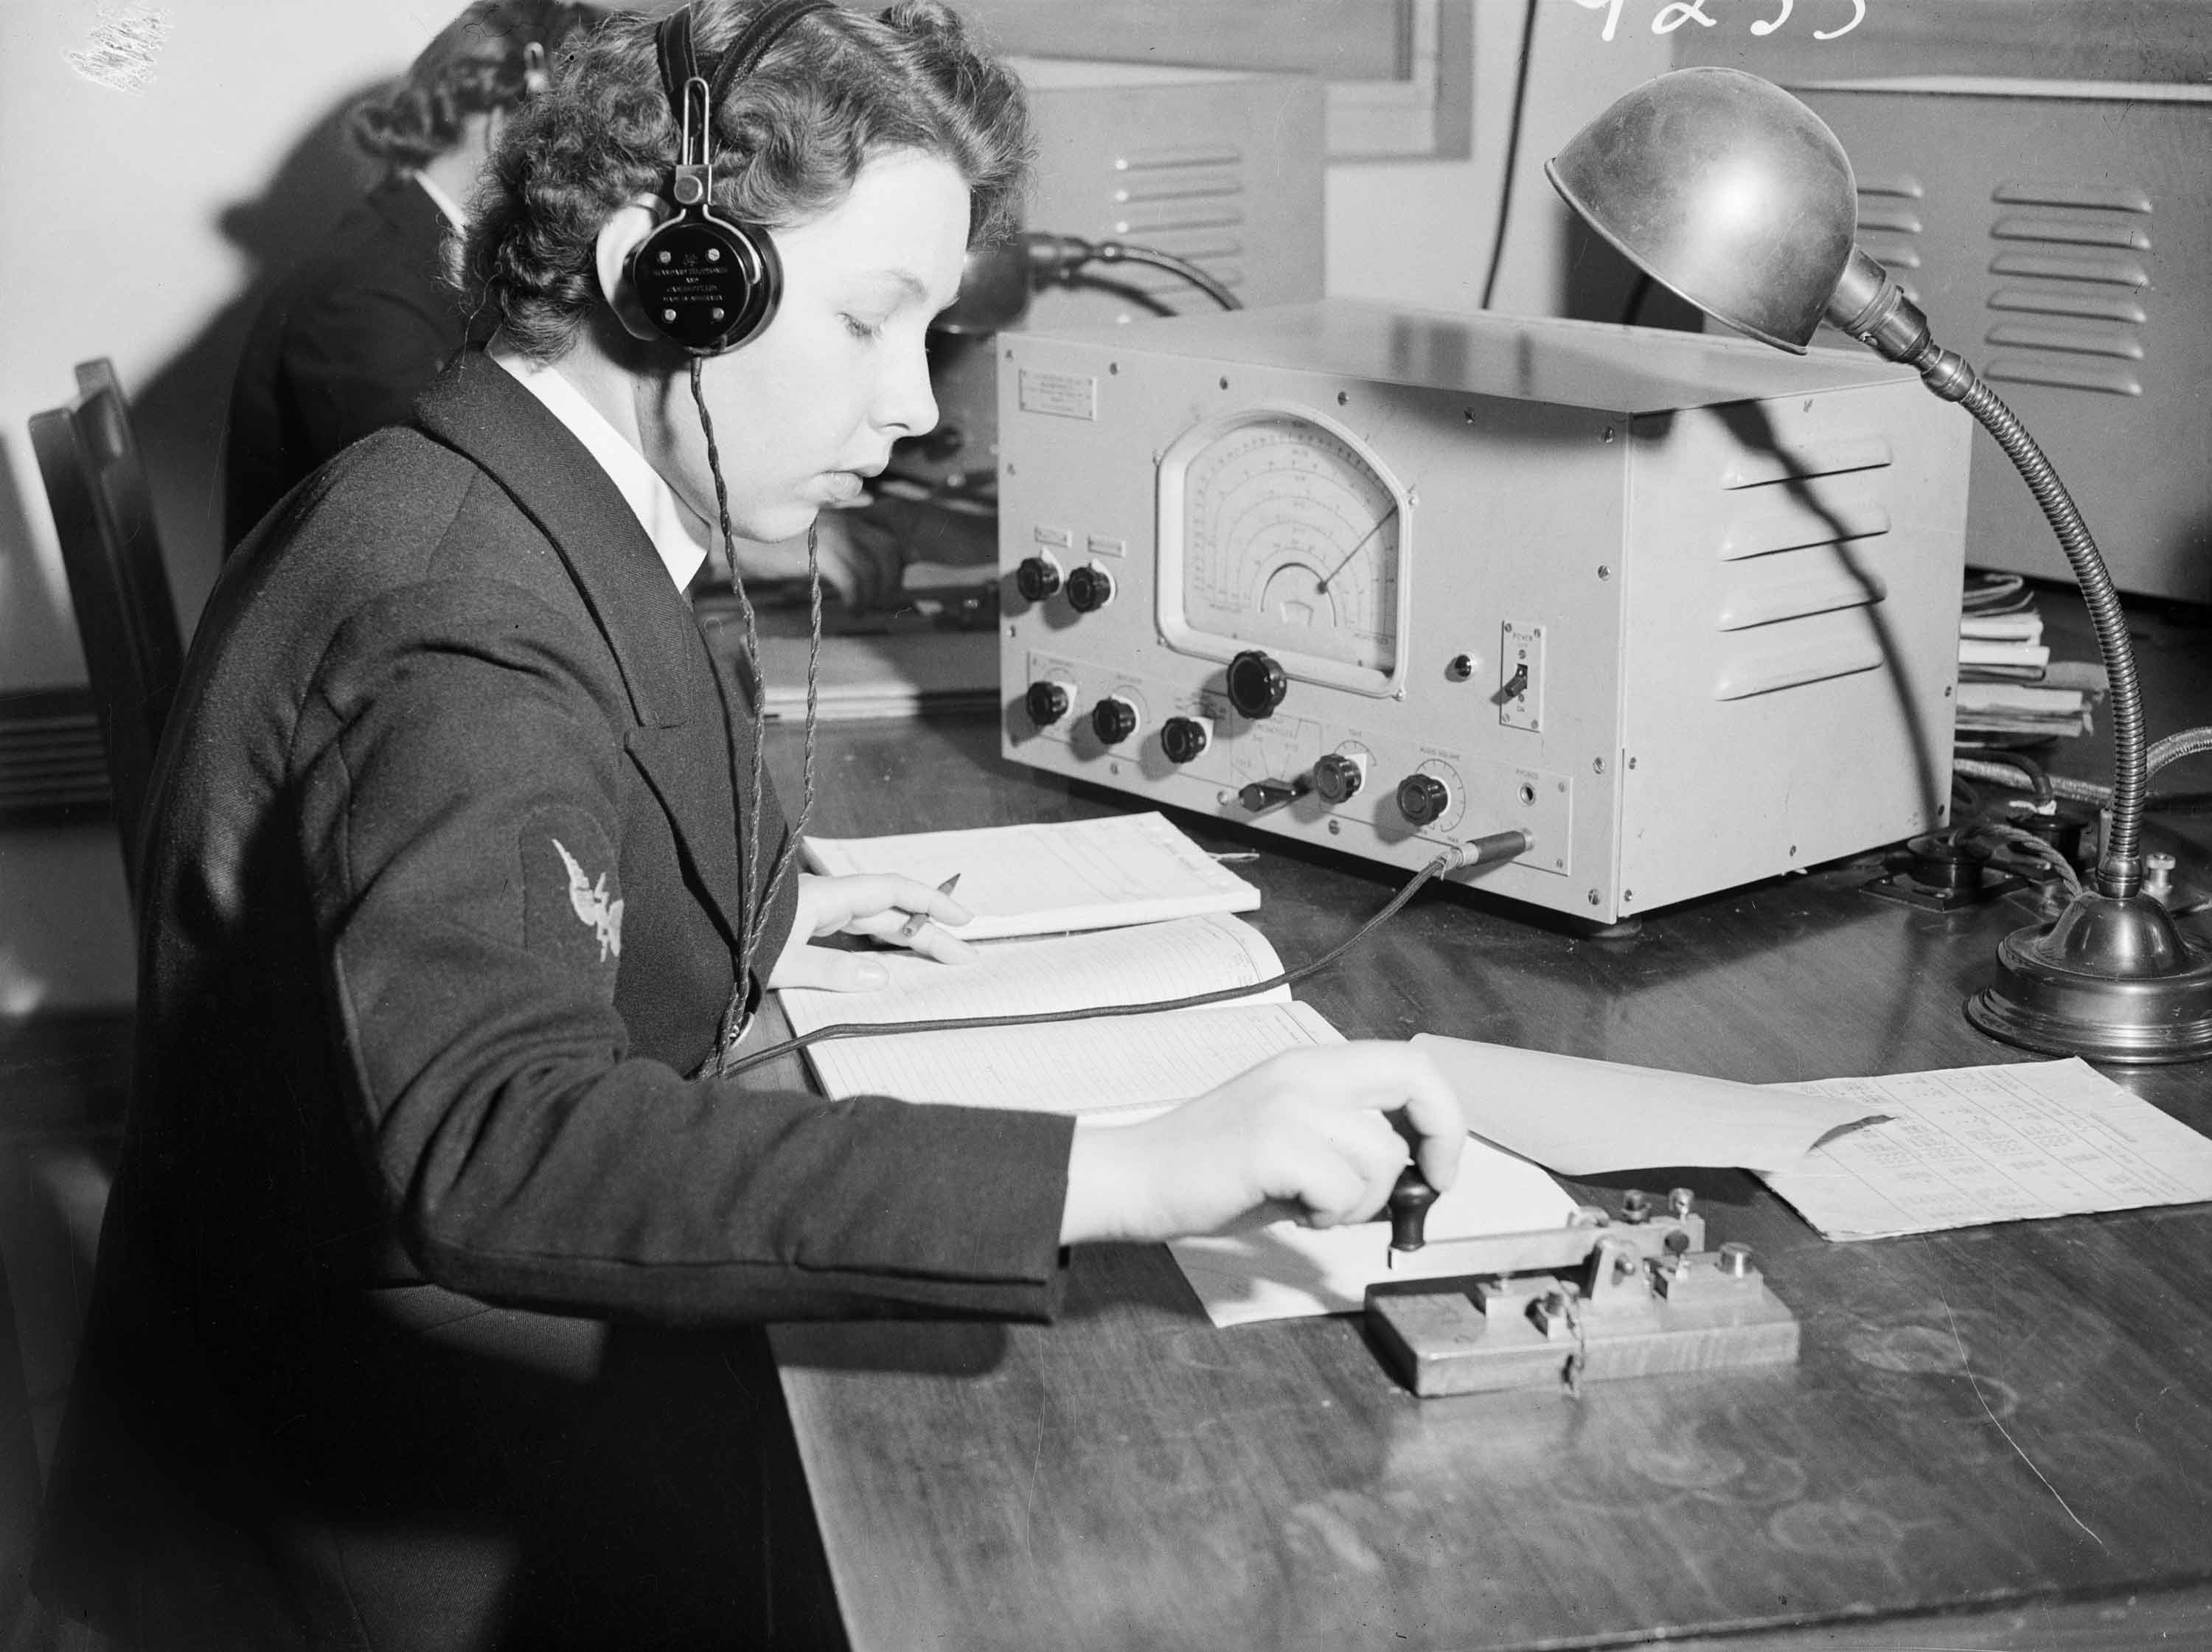 A woman wearing a uniform and headphones works at a desk with radio receiver, morse key, books and a lamp. 